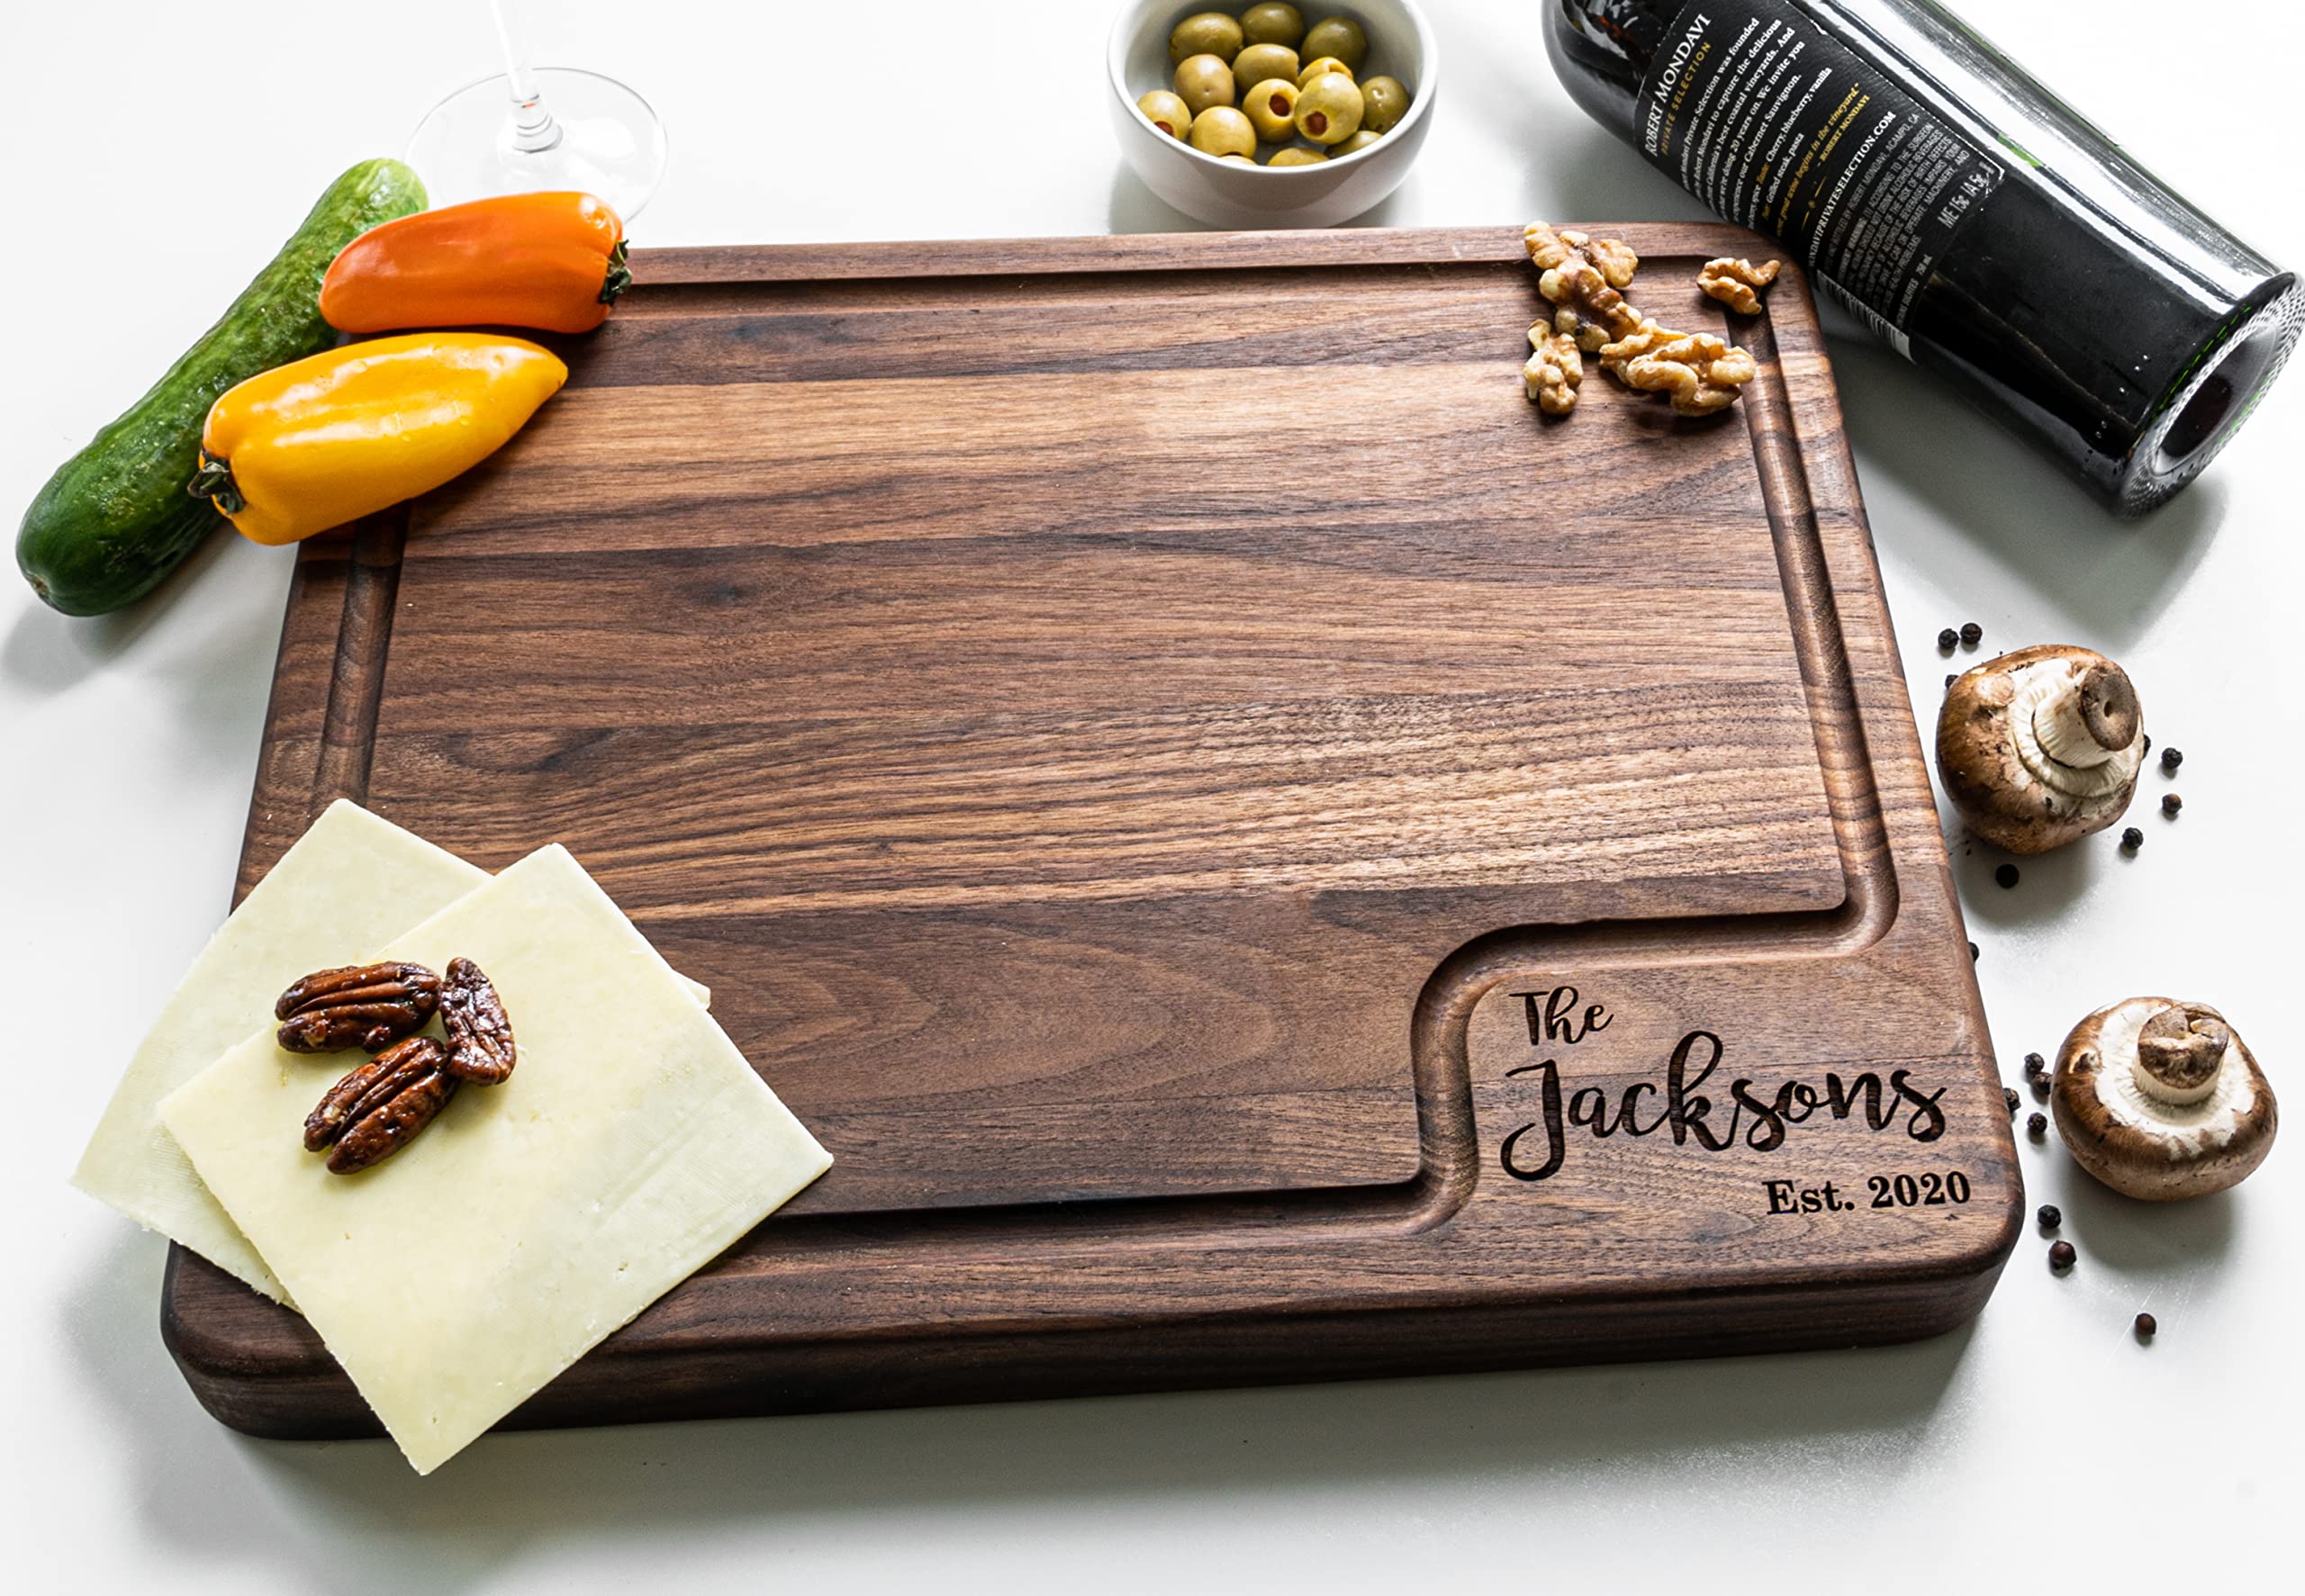 Custom Cutting Boards Wood Engraved Cutting Board Personalized, USA Made - Thick Maple/Walnut Personalized Cutting Boards Wood Engraved, Personalized Wedding Gifts for the Couple